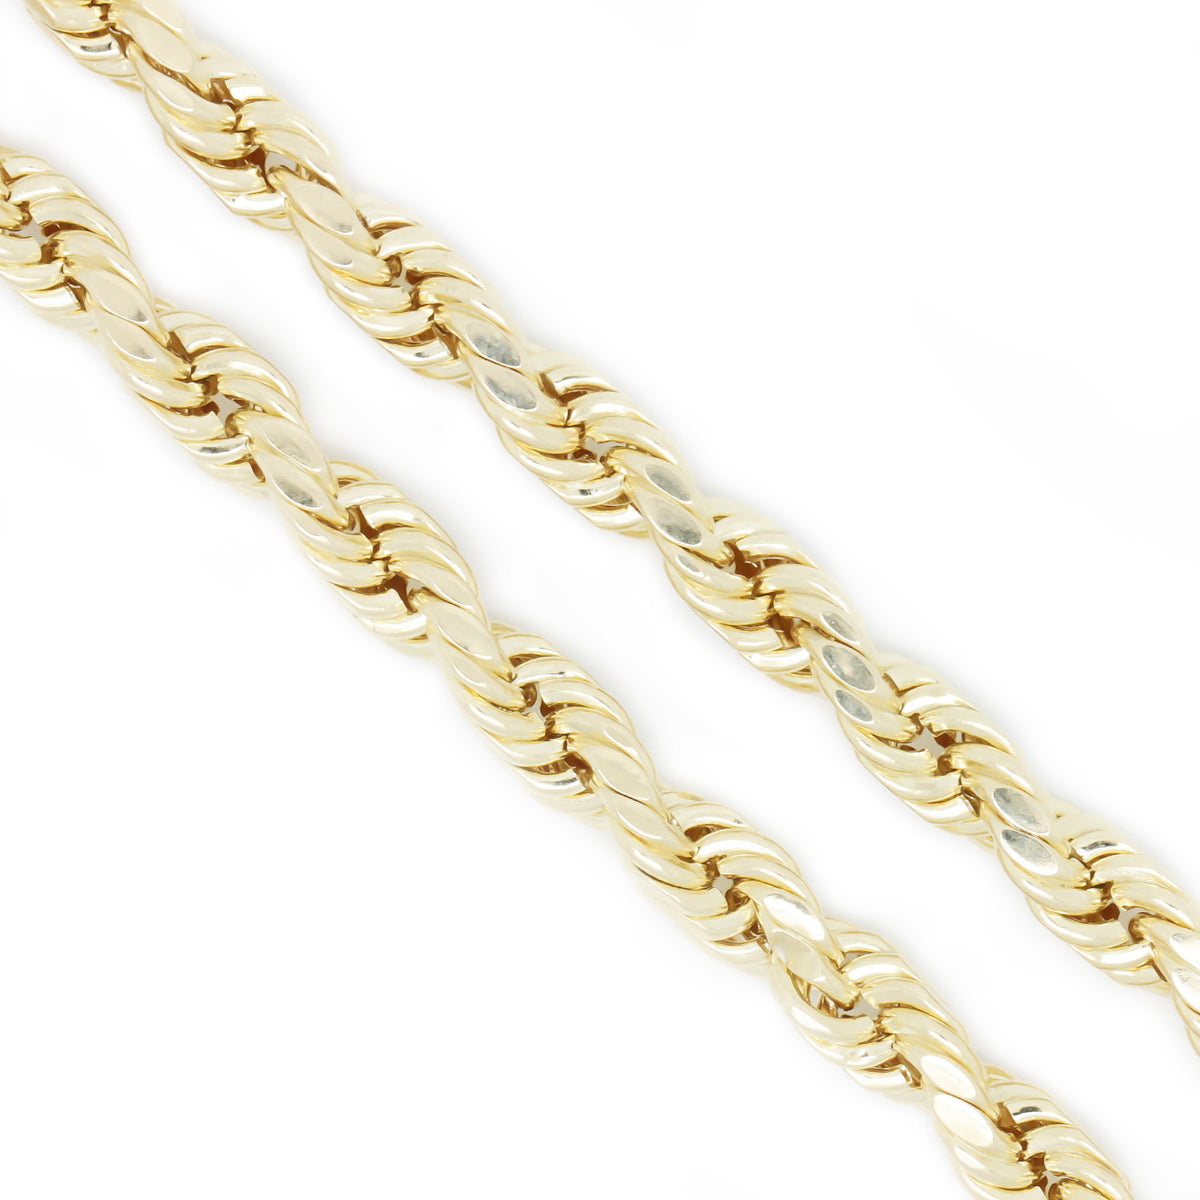 10K Yellow Gold 4.75 mm Rope Chain Necklace 26 Inches